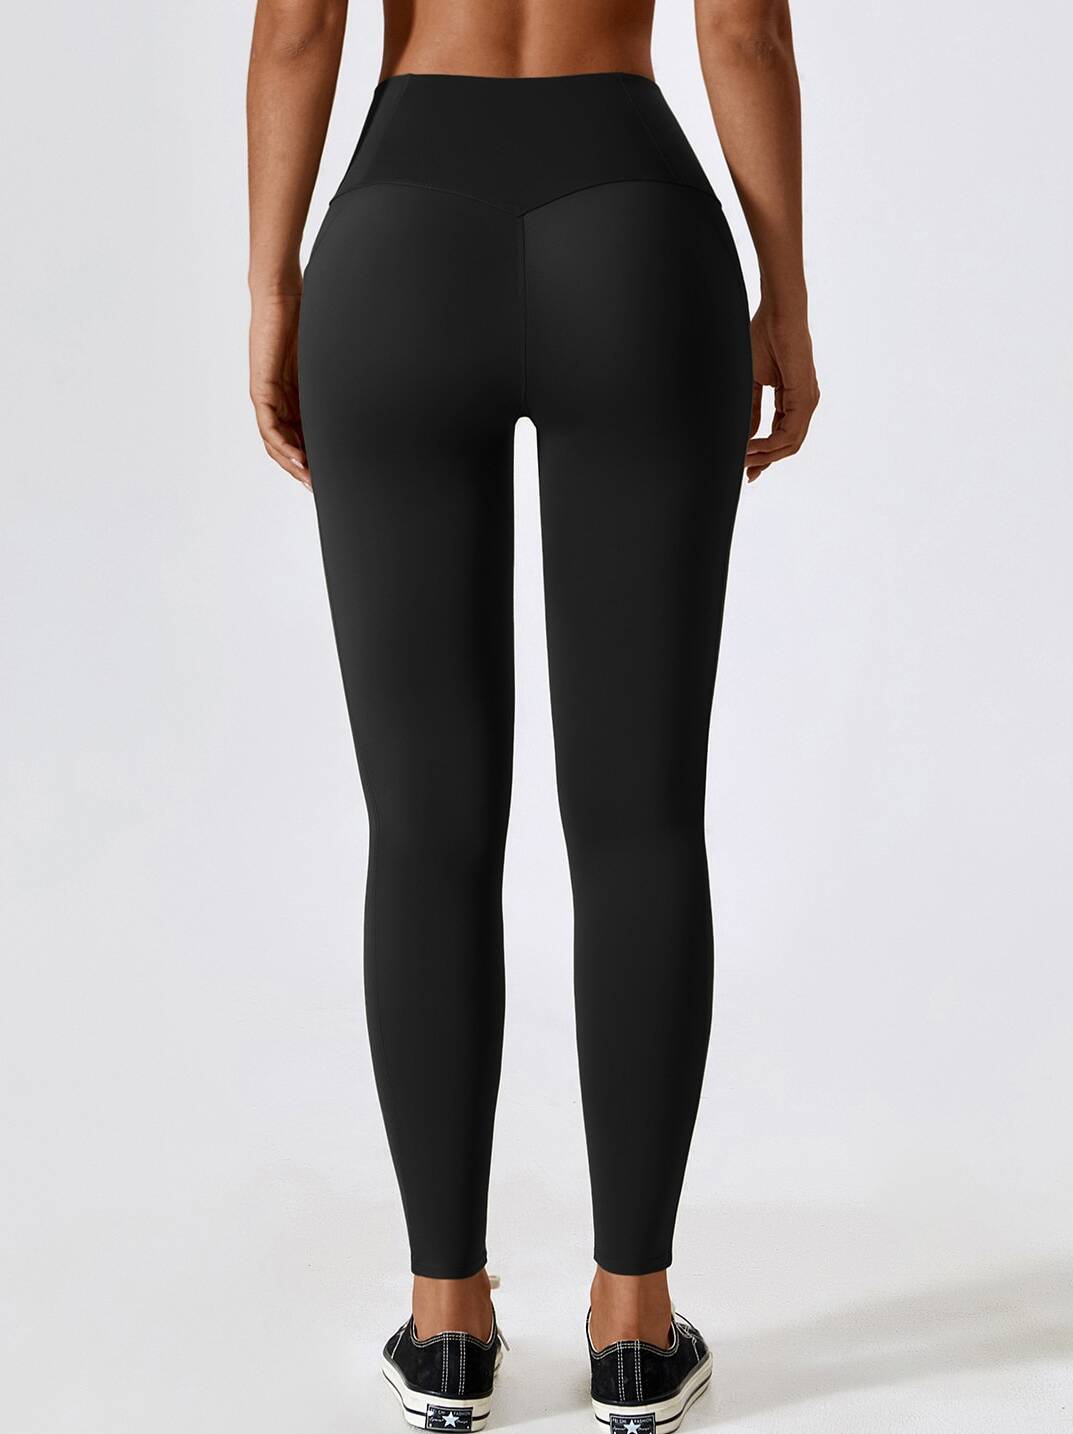 https://valueyoga.co/wp-content/uploads/2023/08/Experience-Optimal-Comfort--Style-With-Our-Luxurious-High-Waisted-Yoga-Pants-Featuring-2-Convenient-Side-Pockets-e1693236582449.jpg